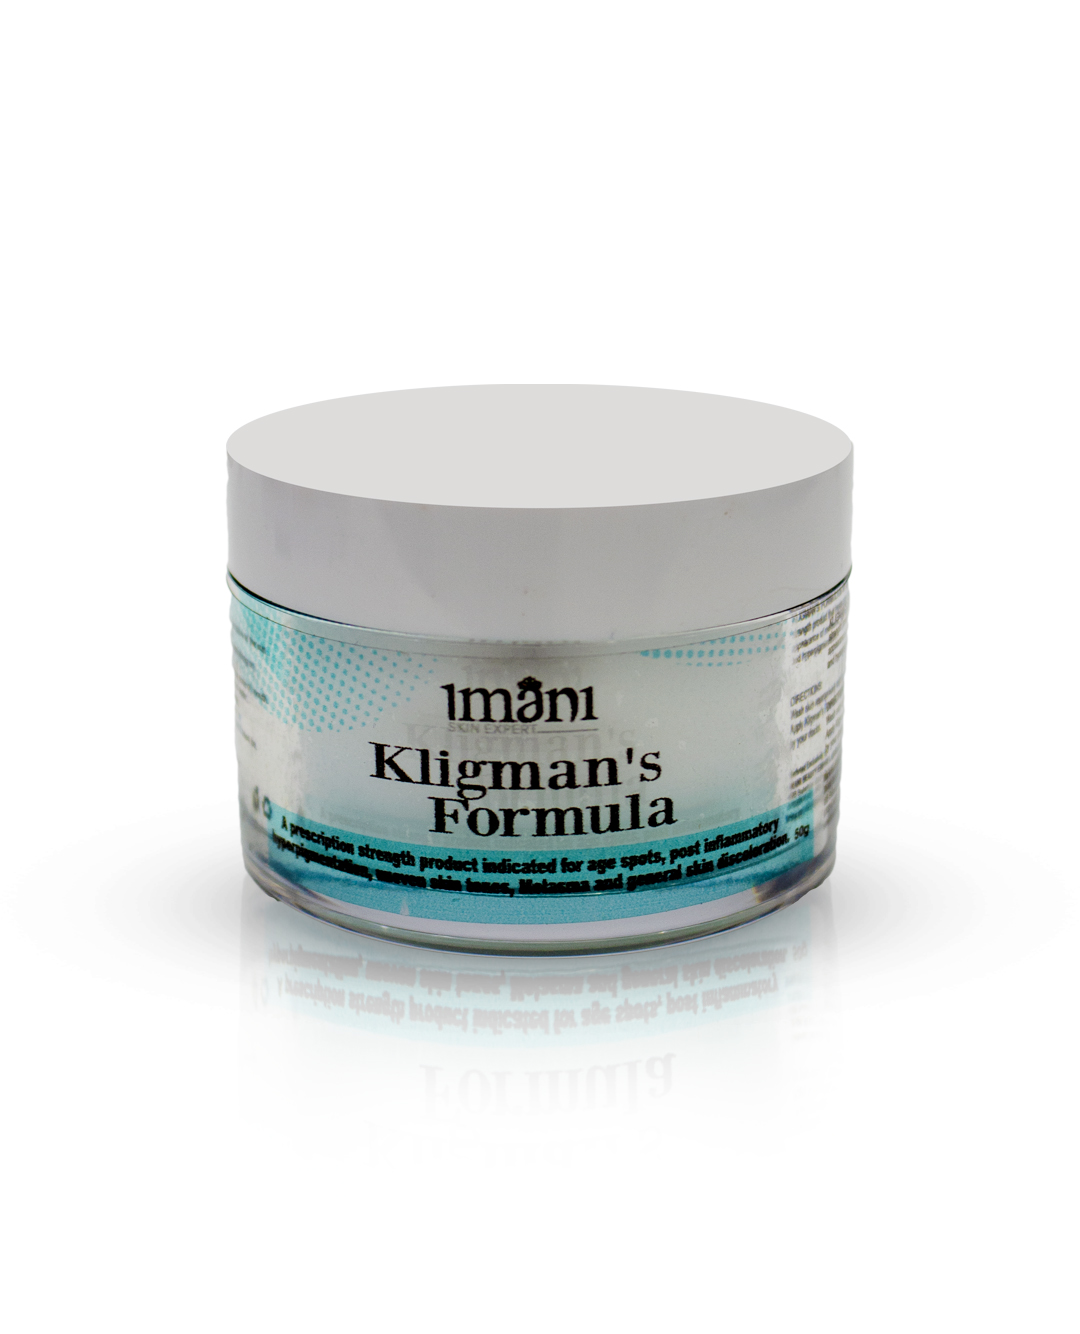 Buy Kligmans Formula Online. Enjoy safe shopping online with our ecommerce. ✓ Best Price in Nigeria ✓ Fast Delivery & Express delivery Available. Also available at the Lagos and Abuja offices of Imani Aesthetic and Laser Clinic